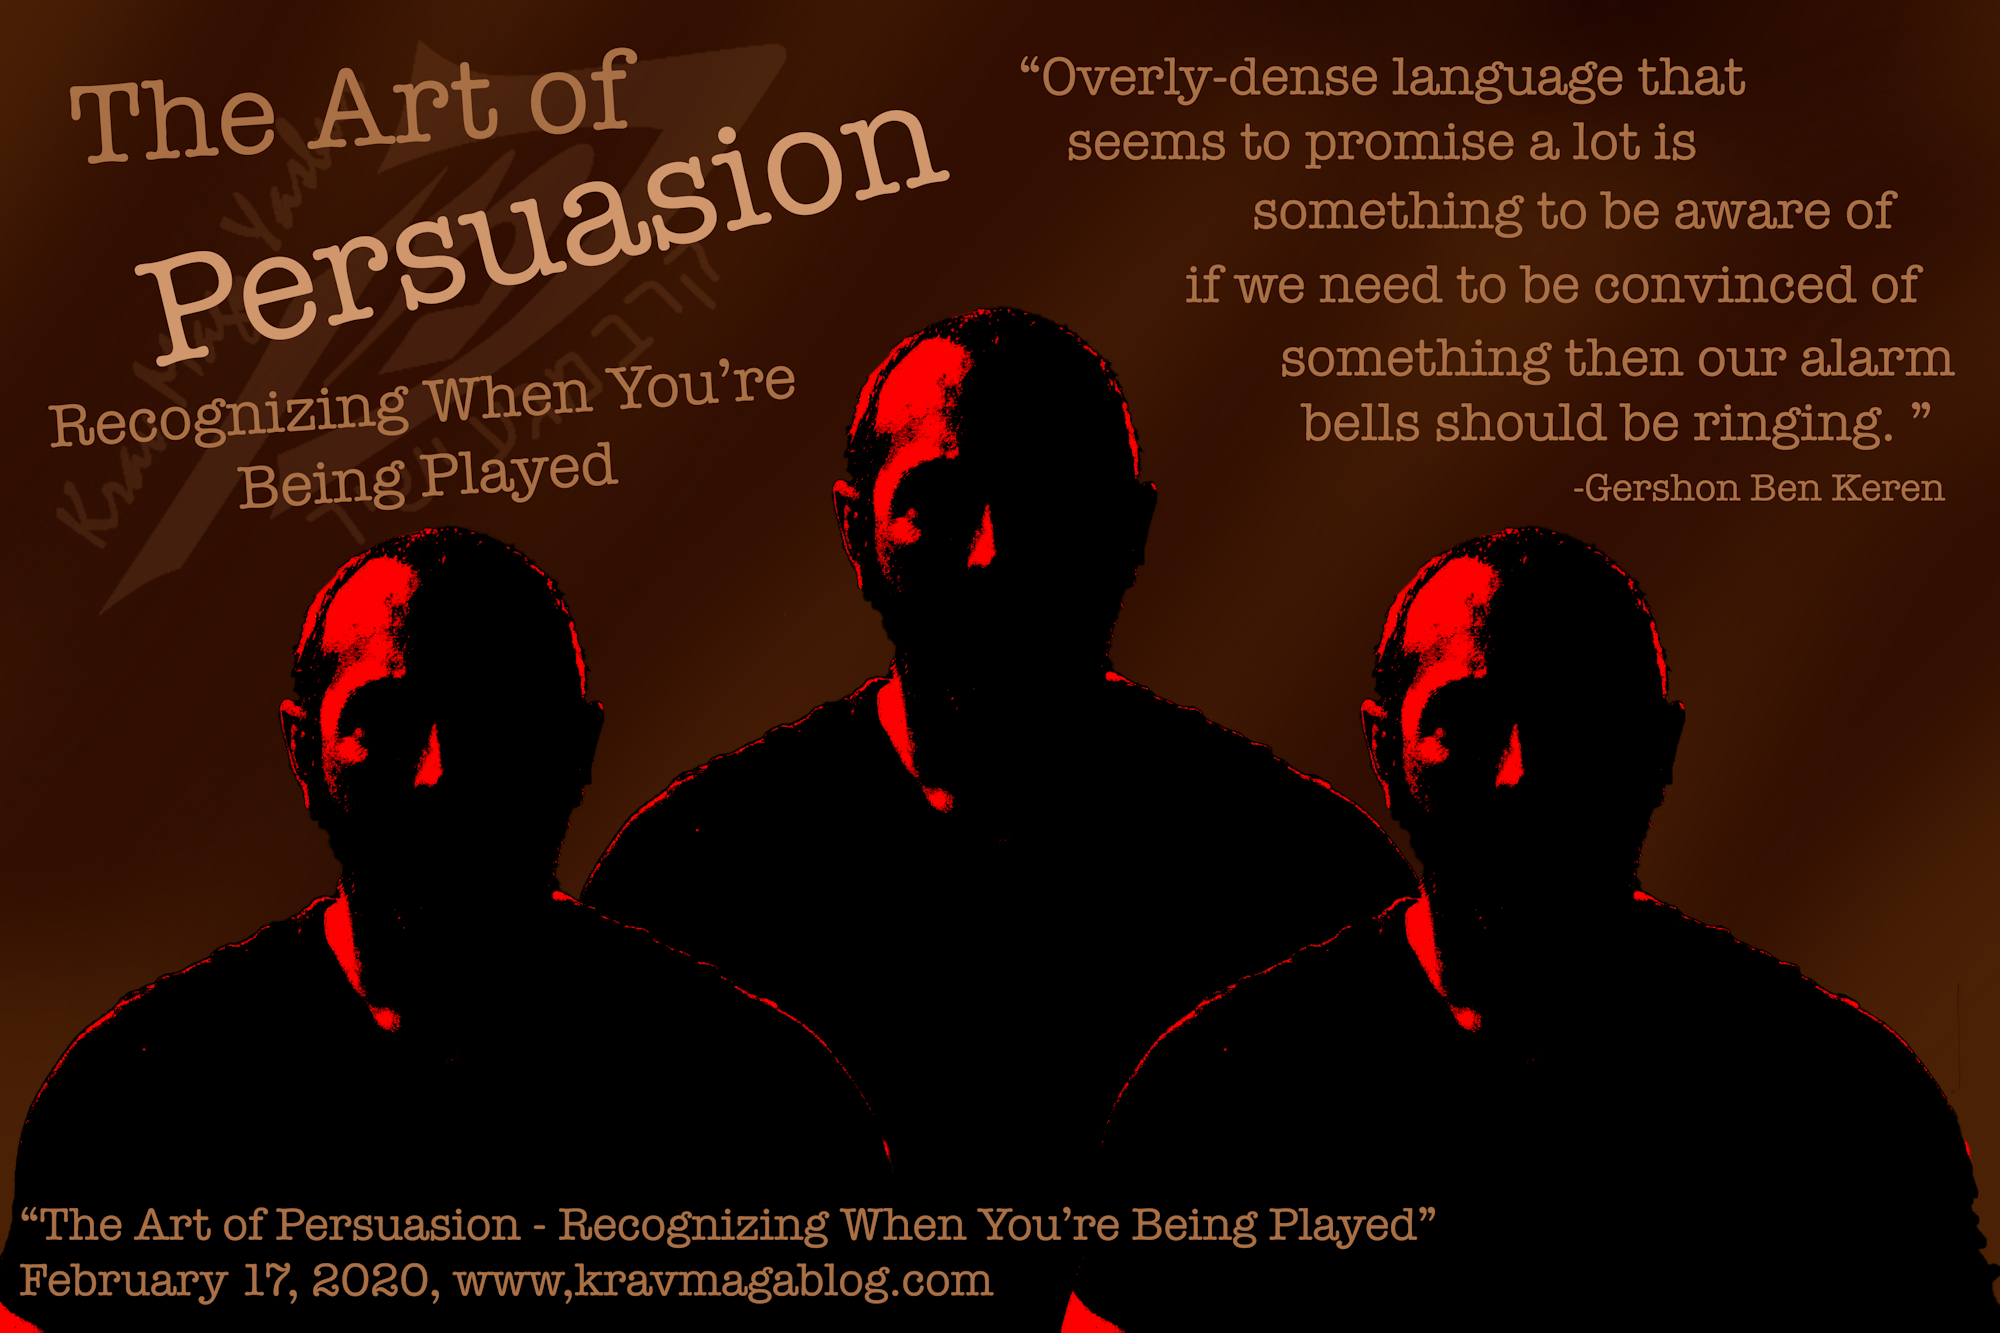 Blog About The Art of Persuasion – Recognizing When You Are Being Played